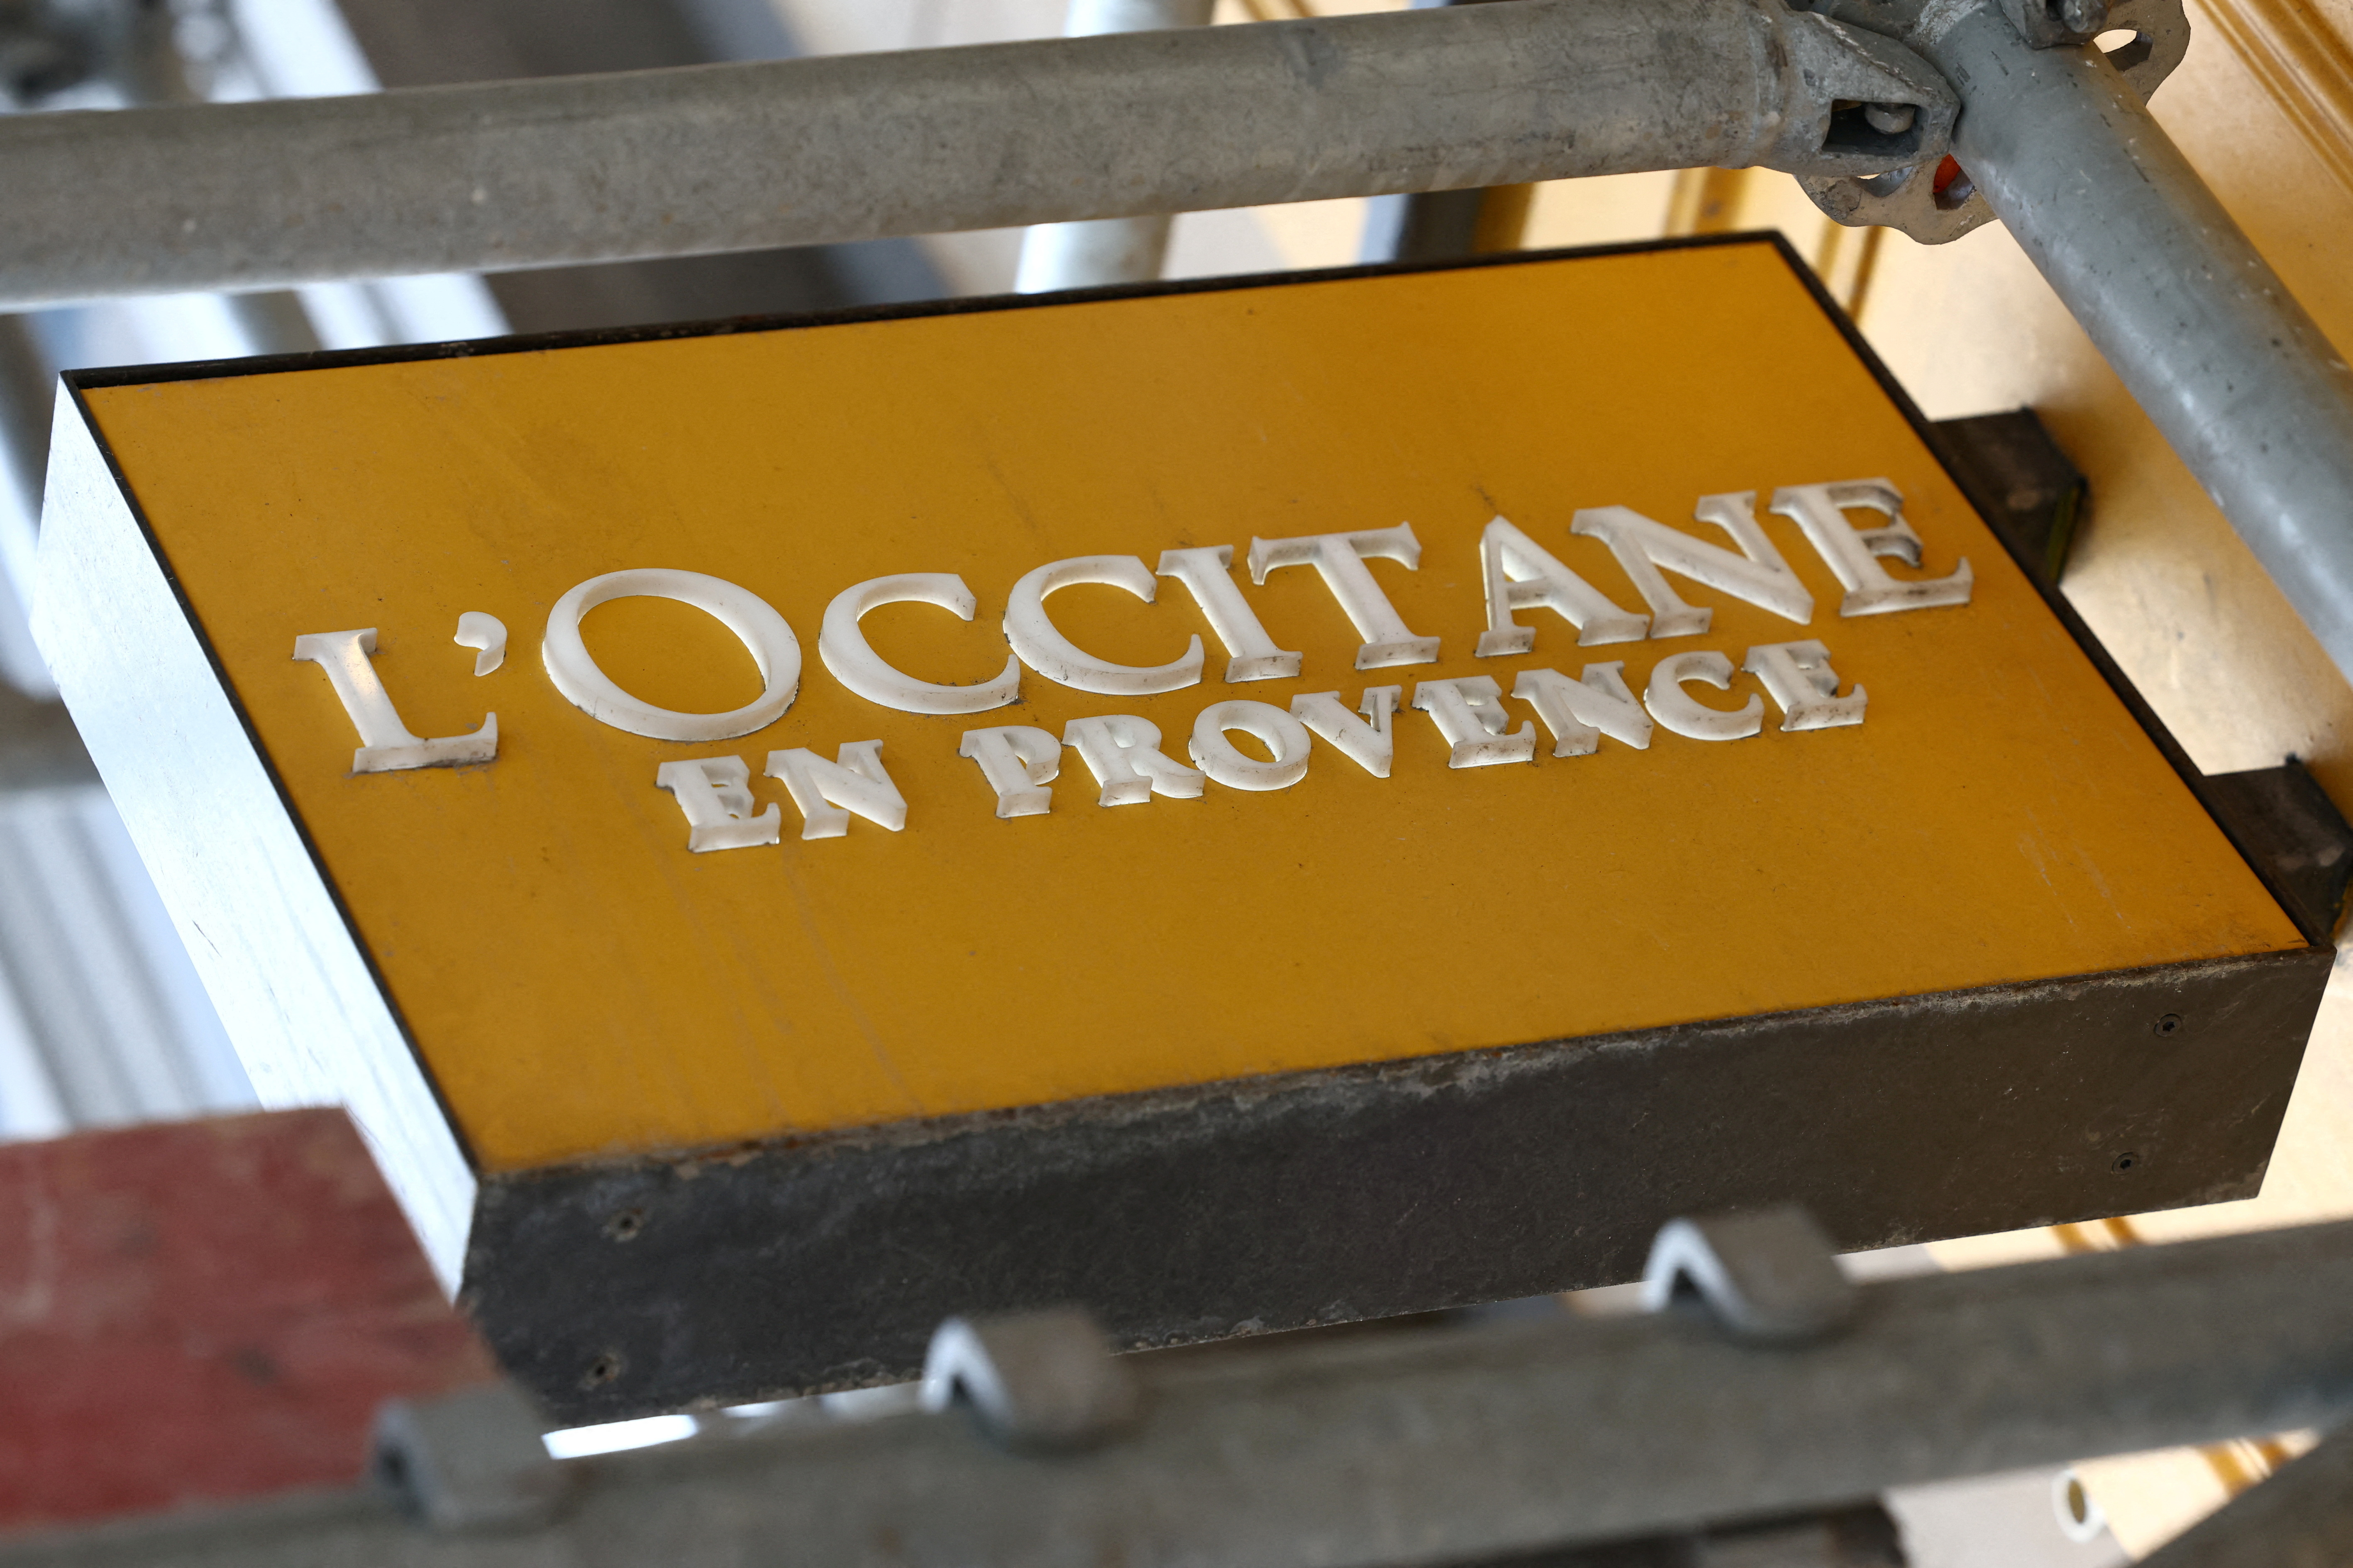 Our brands  Group L'OCCITANE